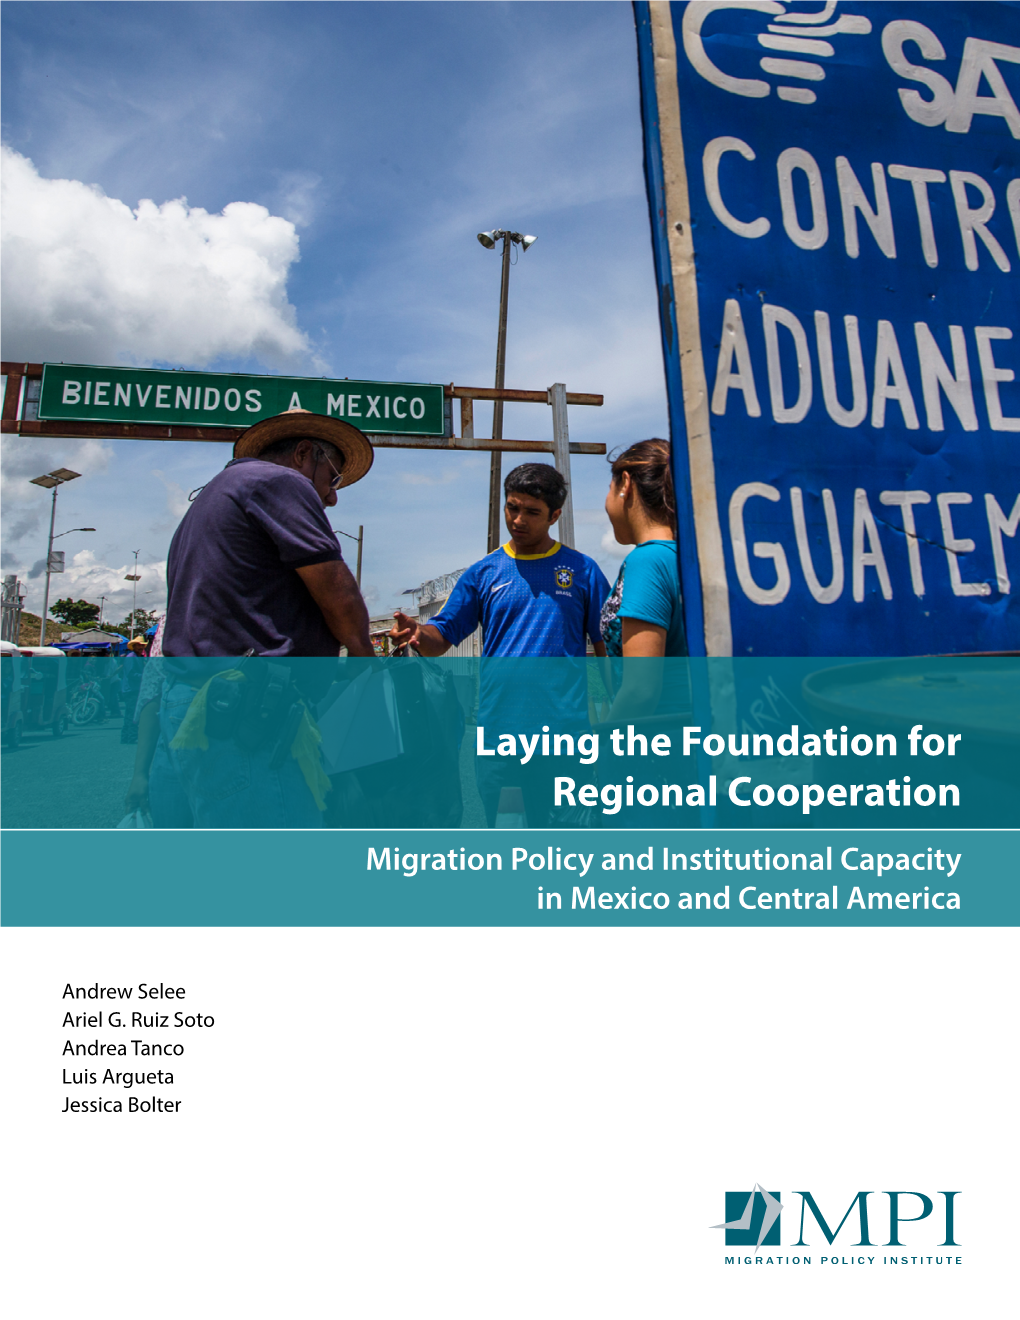 Laying the Foundation for Regional Cooperation: Migration Policy and Institutional Capacity in Mexico and Central America